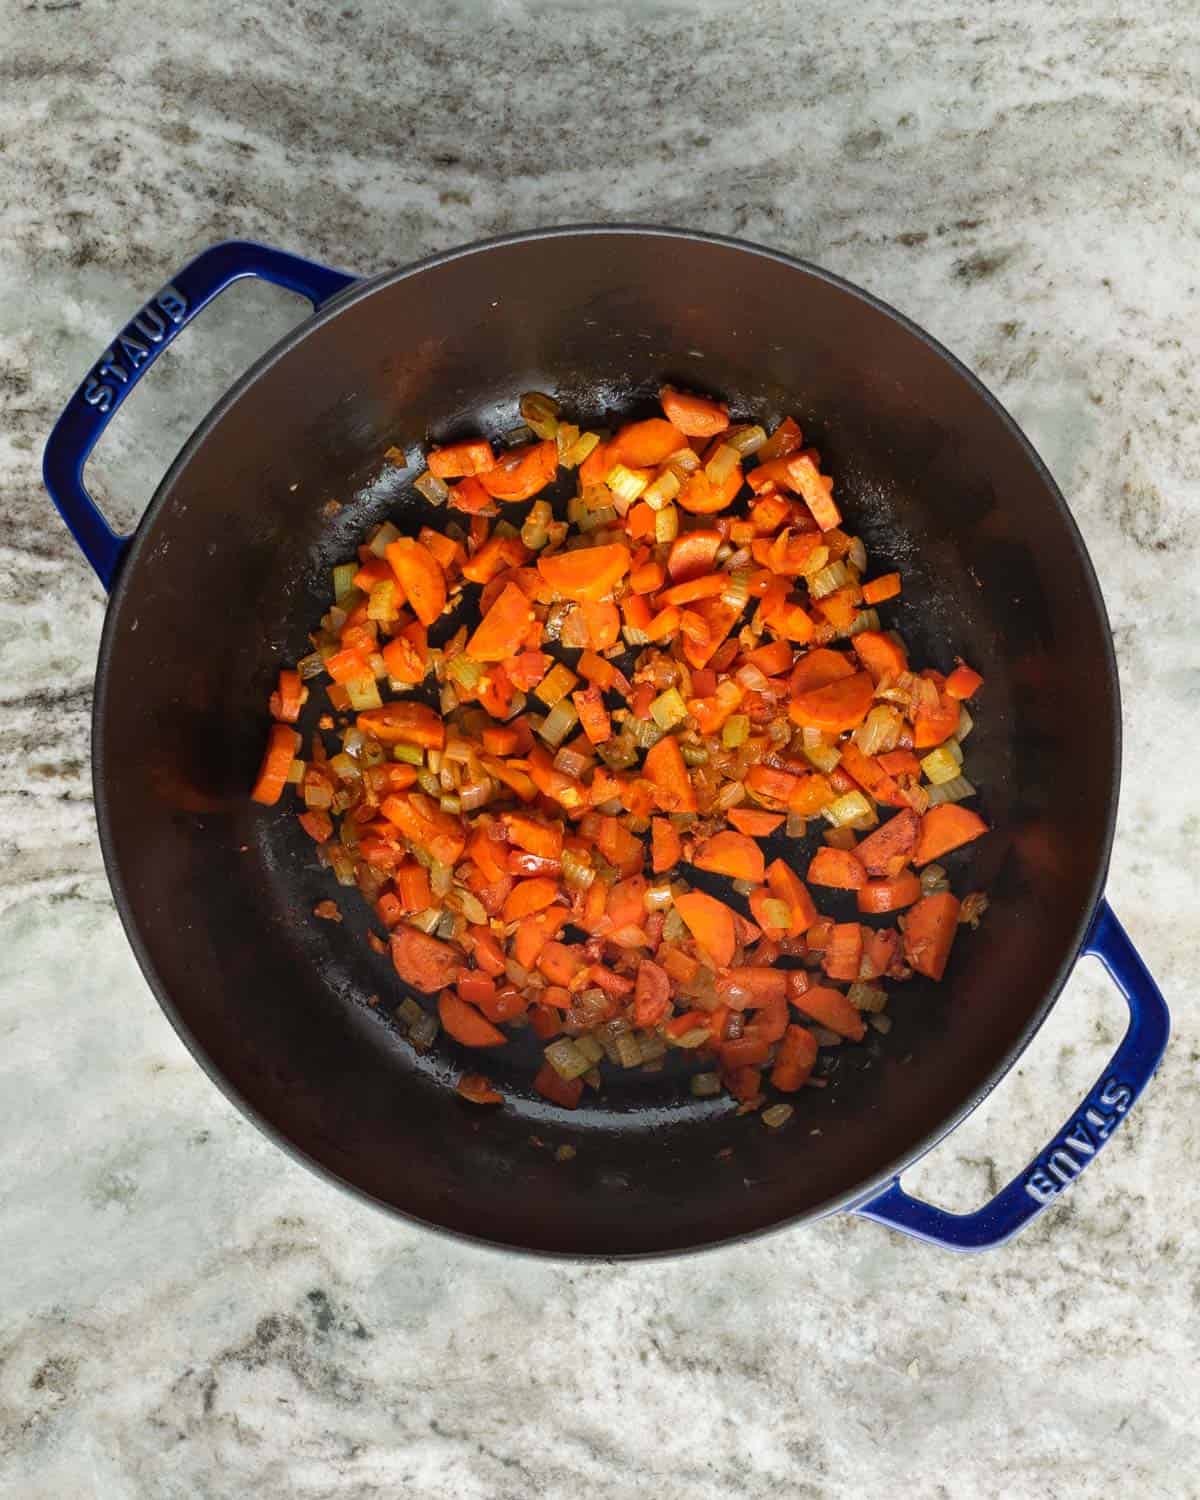 Caramelized tomato paste with sautéed vegetables in a large pot.